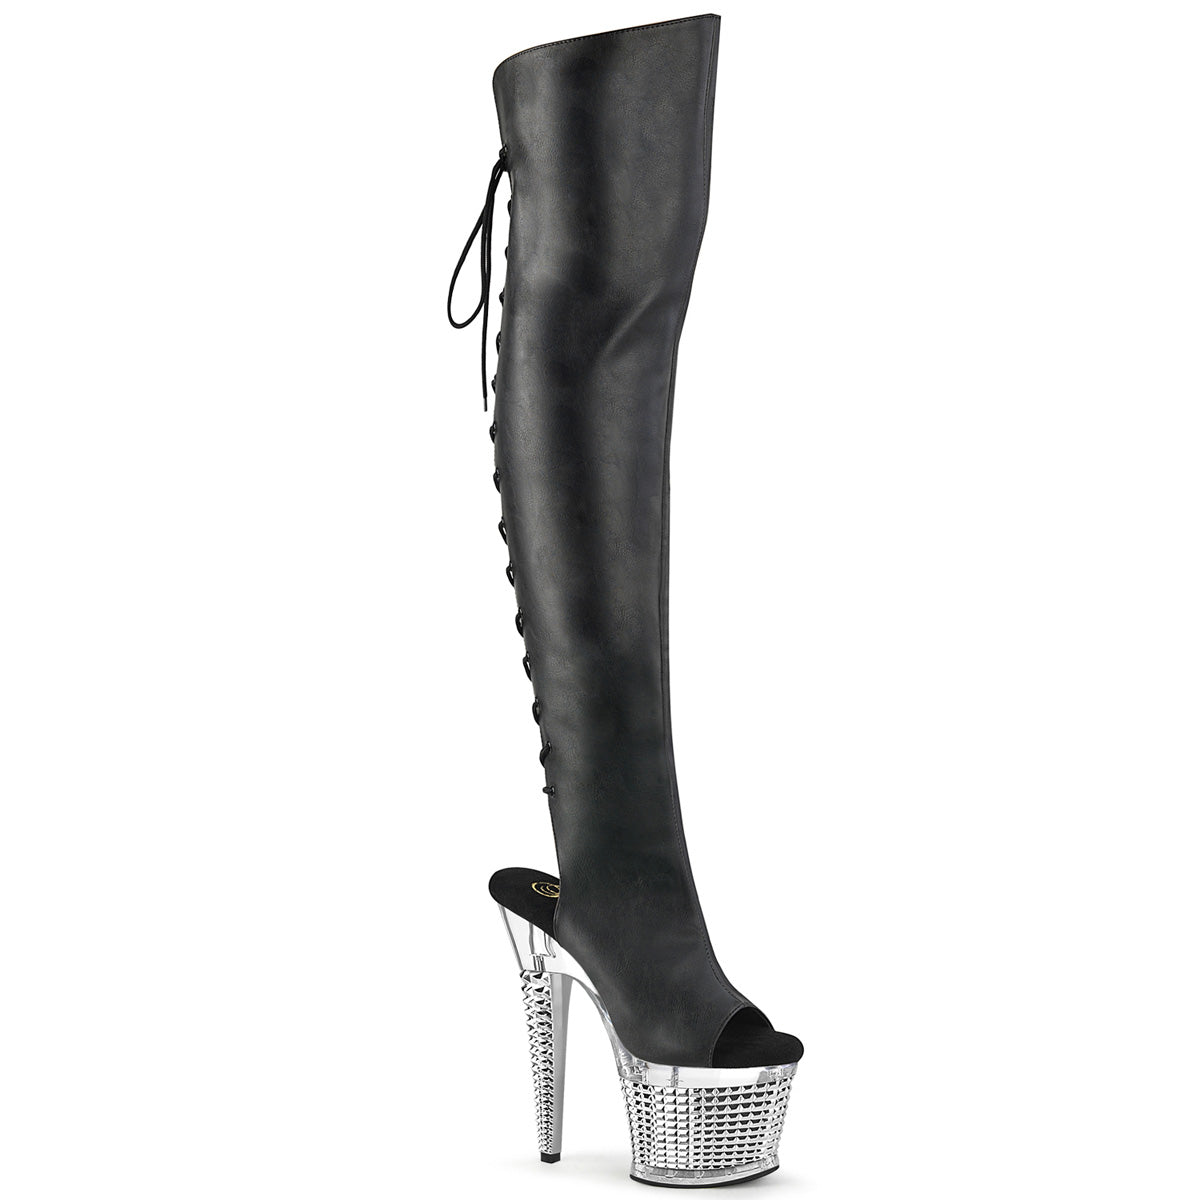 SPECTATOR-3019 Black Faux Leather/Clear-Silver Chrome Thigh Boot Pleaser